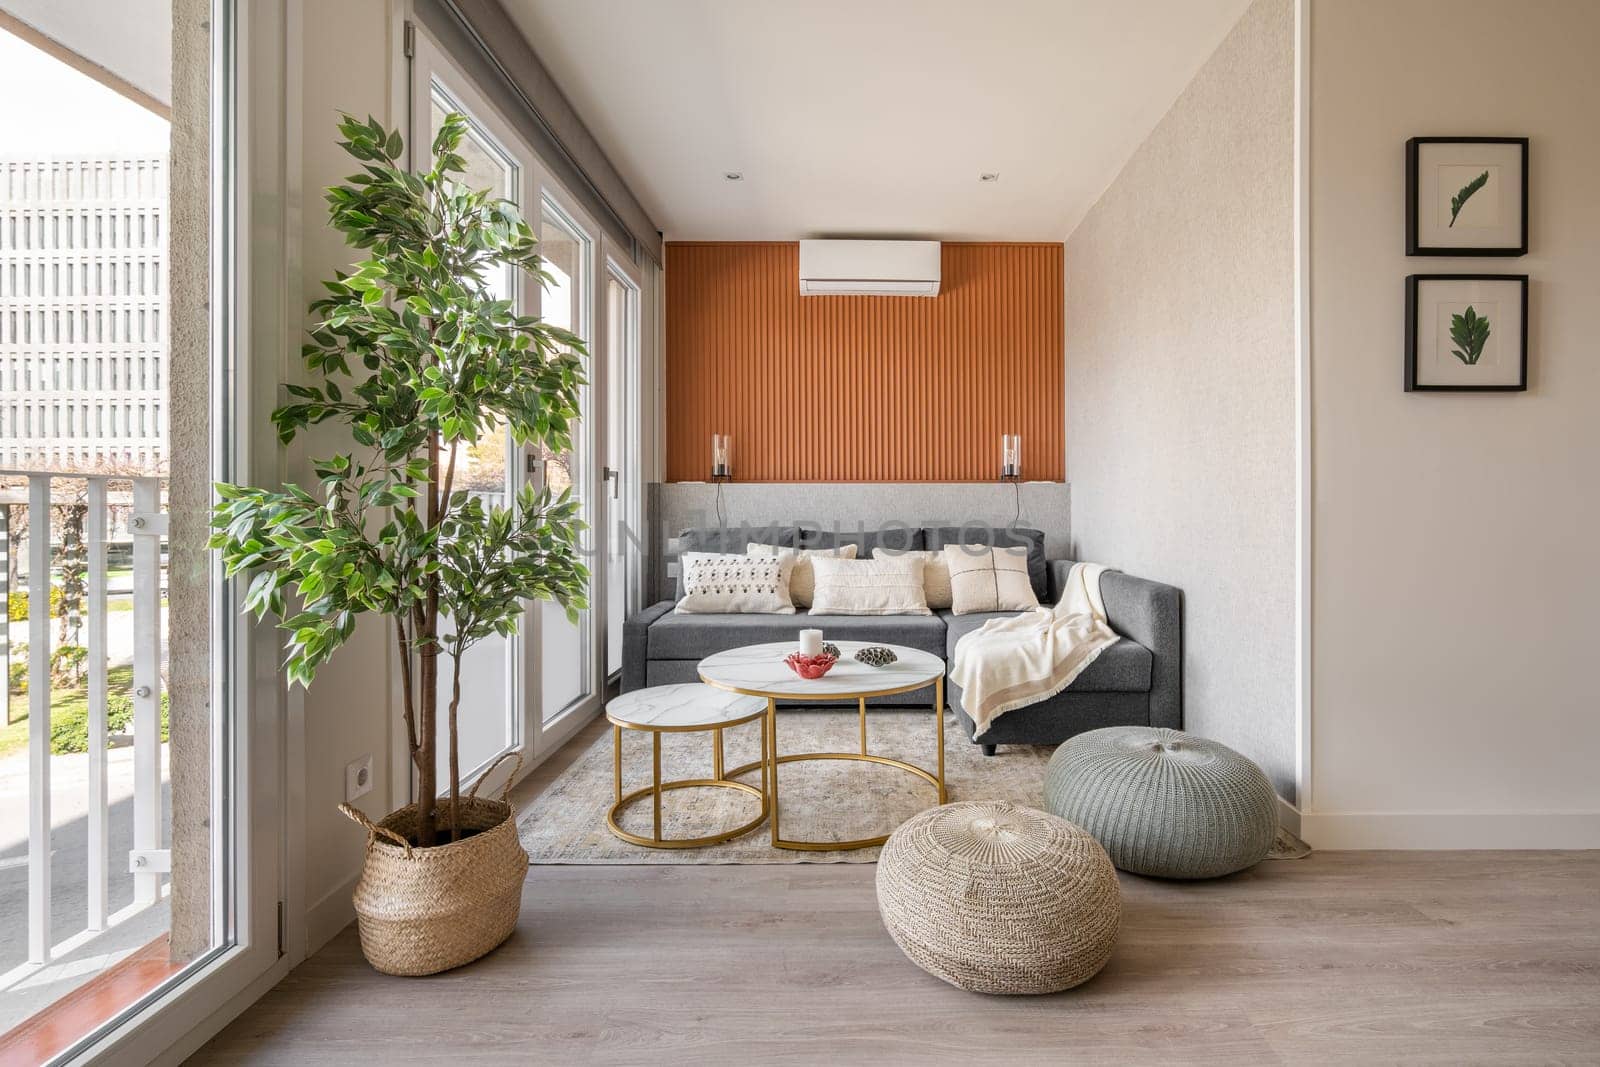 Stylish seating area with a terracotta color wall with a sofa and pouffes near the panoramic windows in the living room. The concept of a modern Scandinavian interior by apavlin